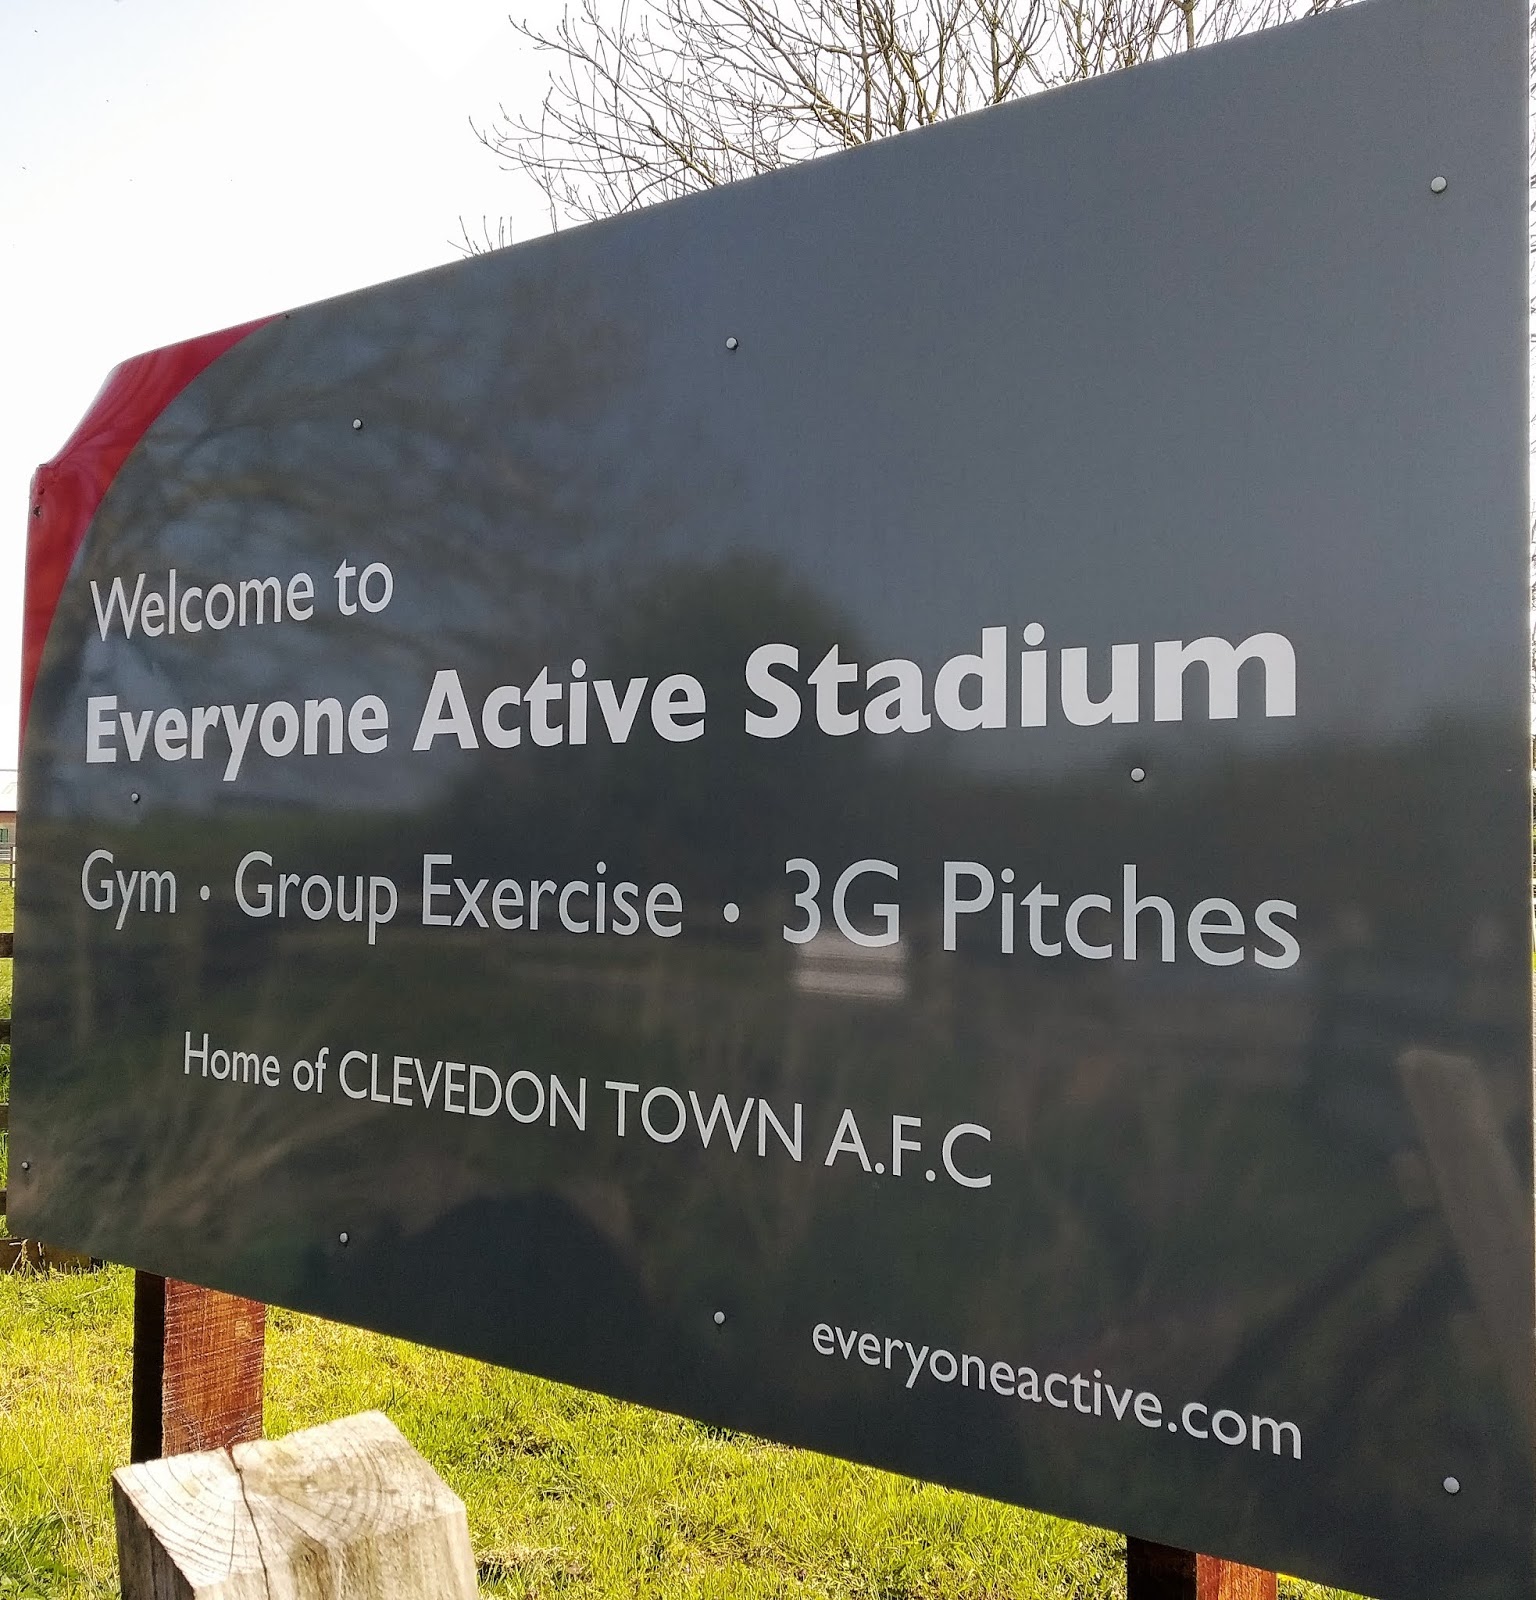 The Wycombe Wanderer: Clevedon Town - The Hand Stadium